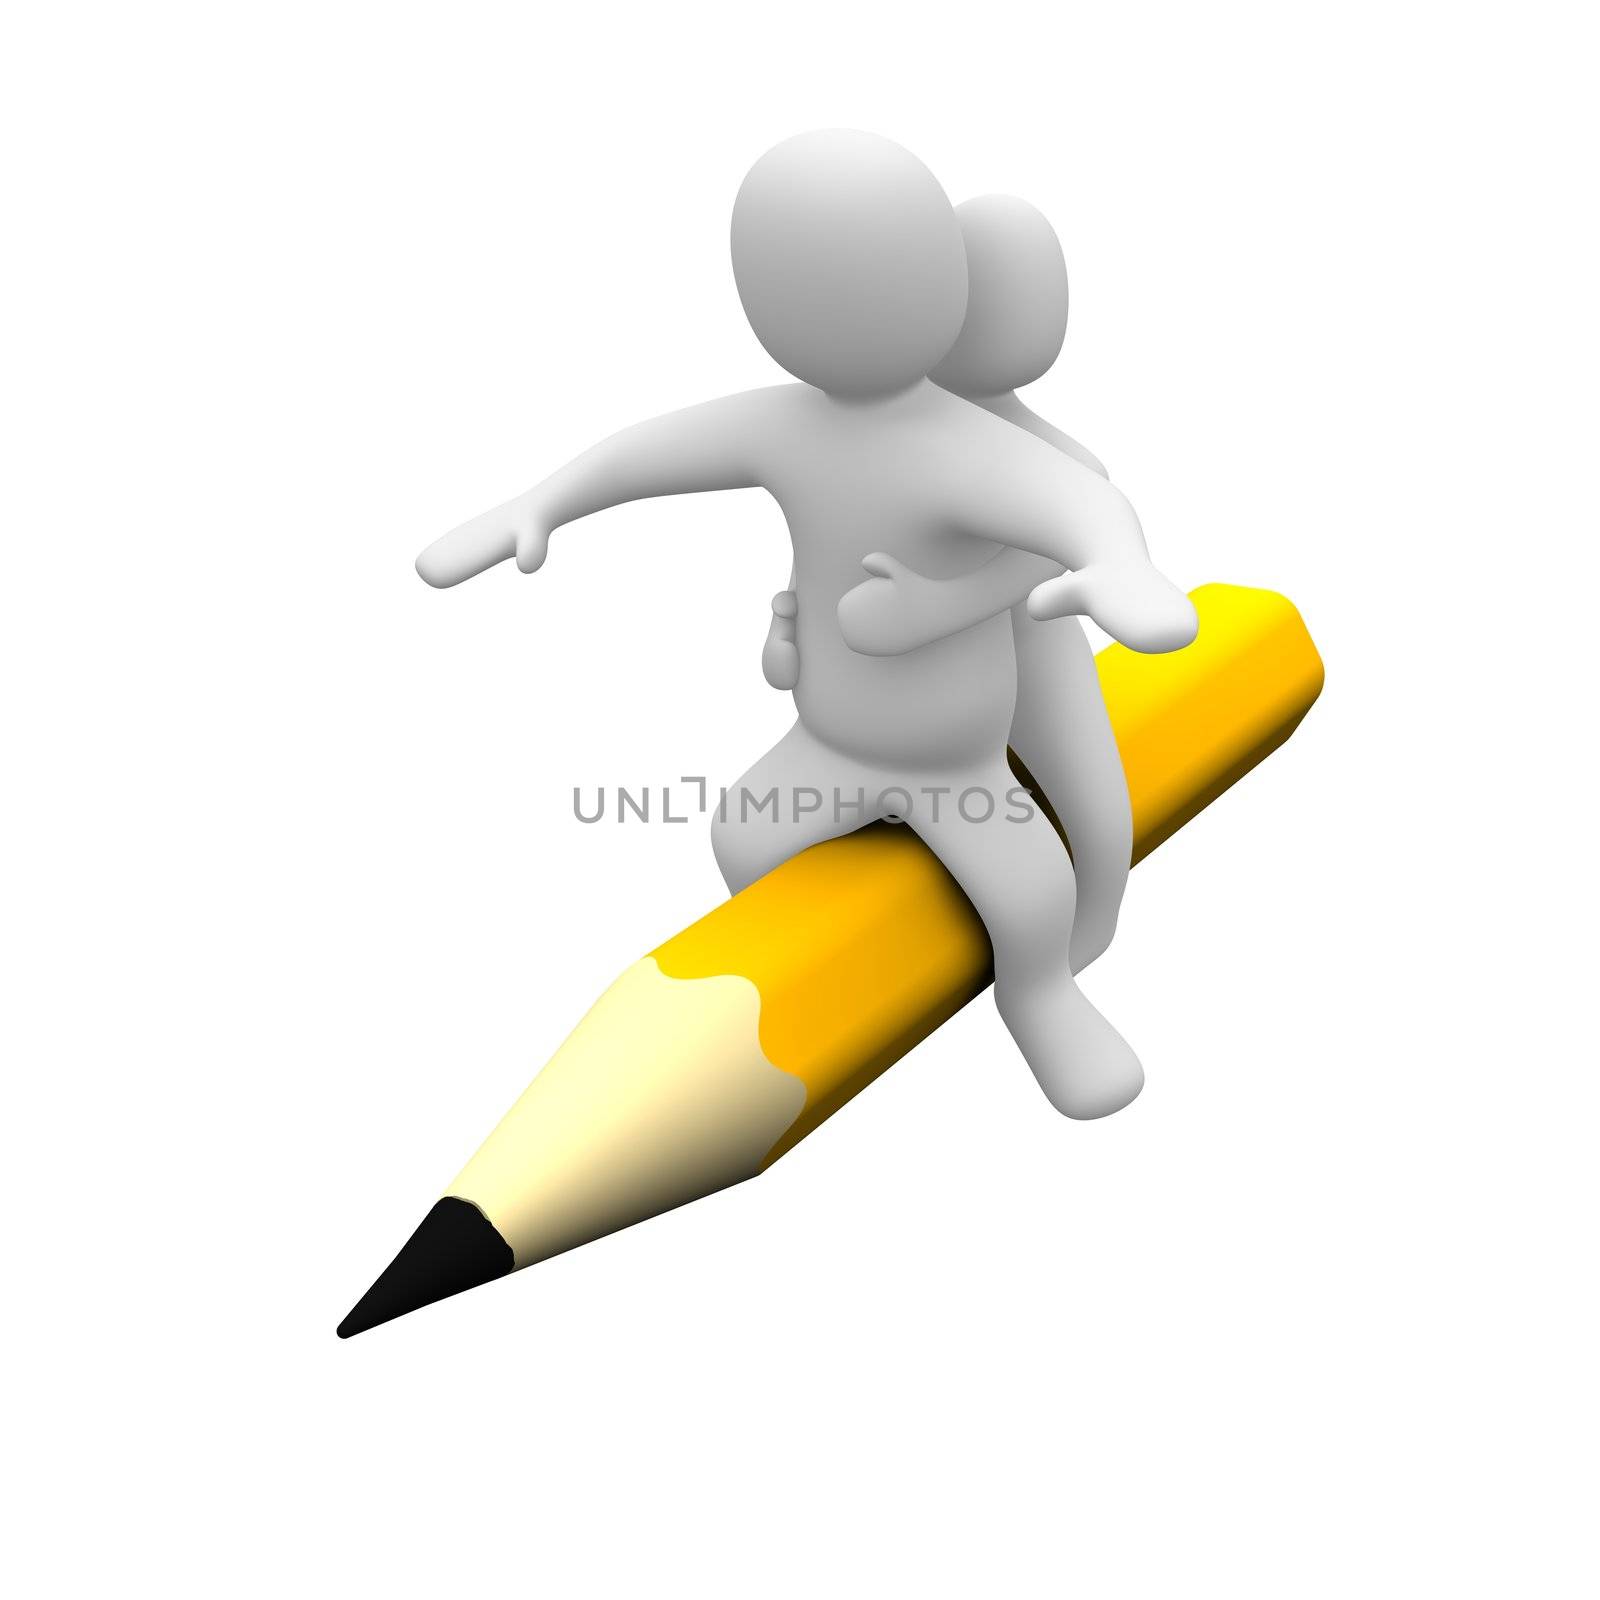 Man and woman sitting on pencil. 3d rendered illustration.